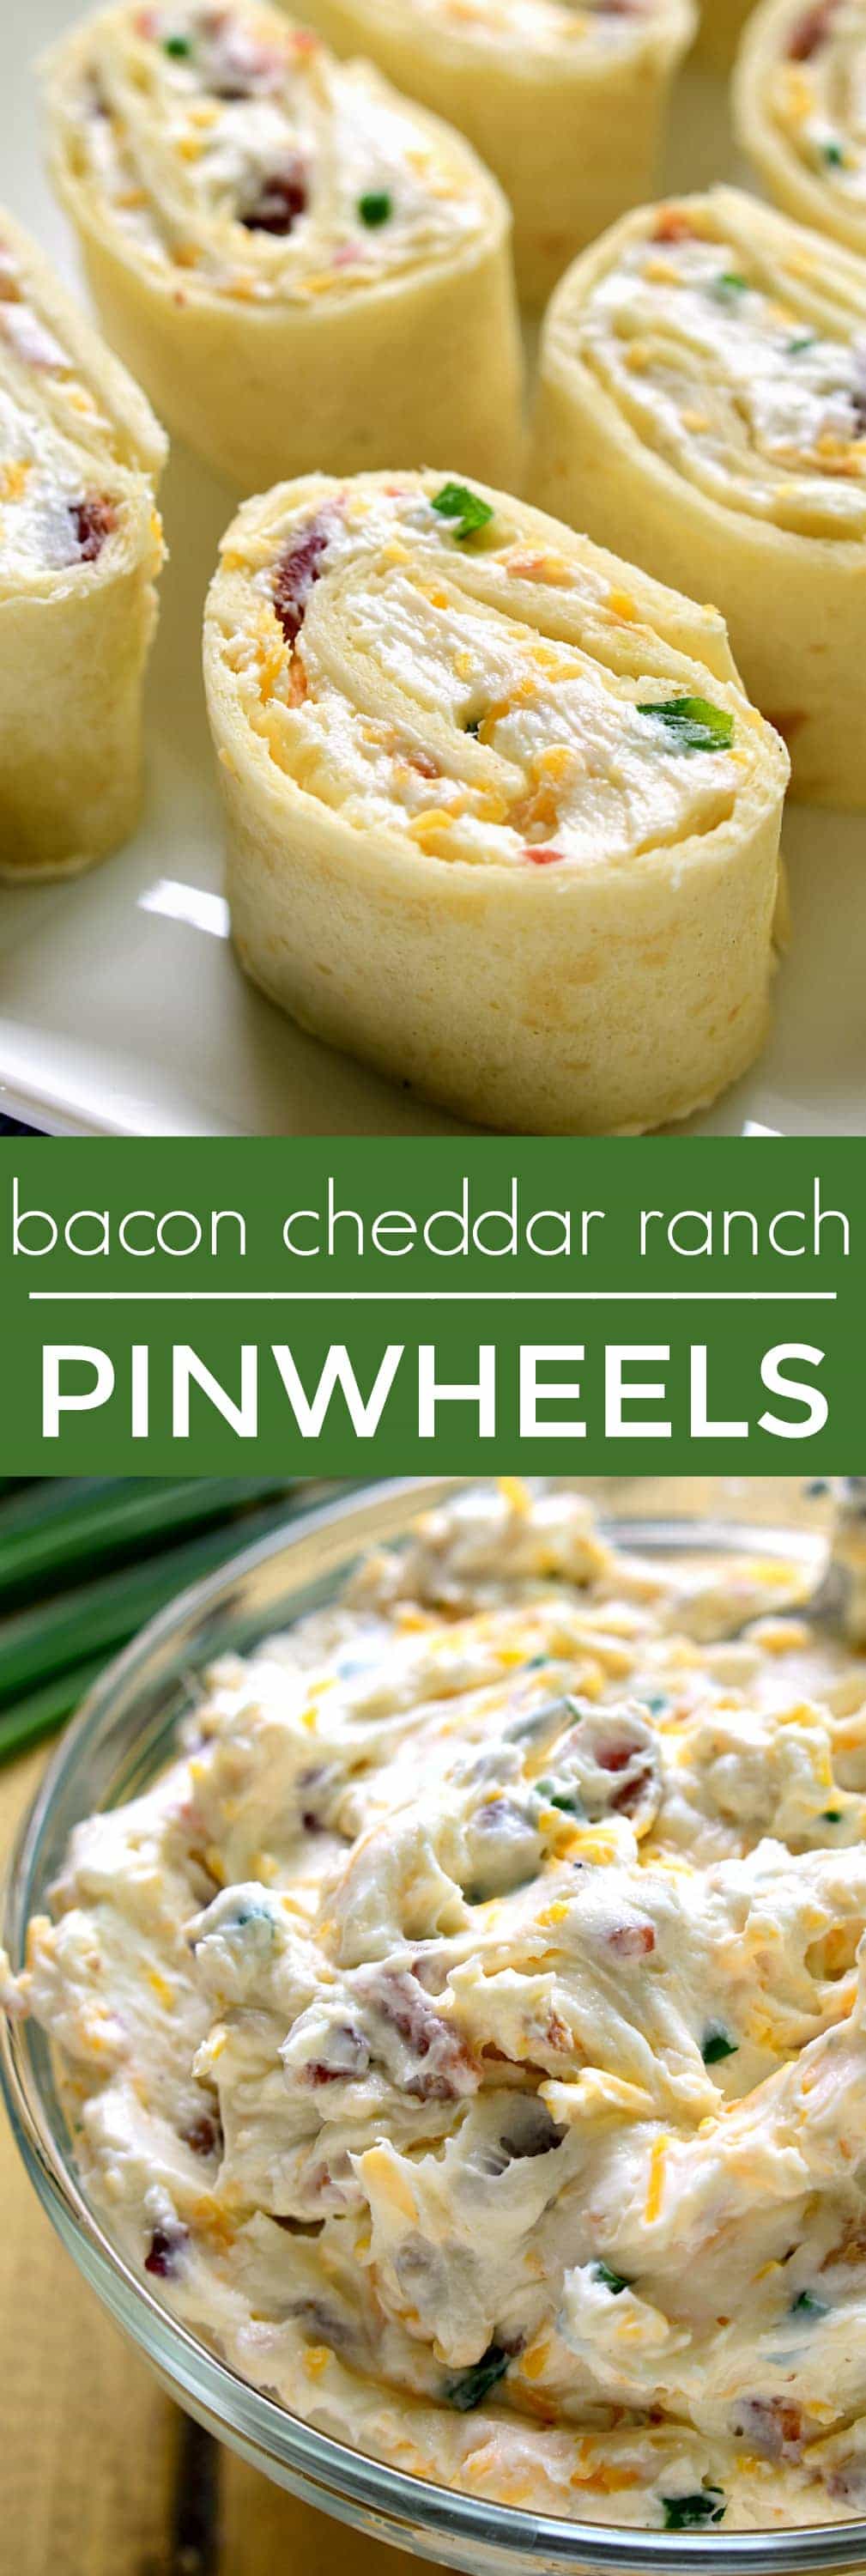 These Bacon Cheddar Ranch Pinwheels are the perfect party food! Loaded with bacon, cheddar cheese, and creamy ranch flavor, they're sure to become your new favorite party appetizer!